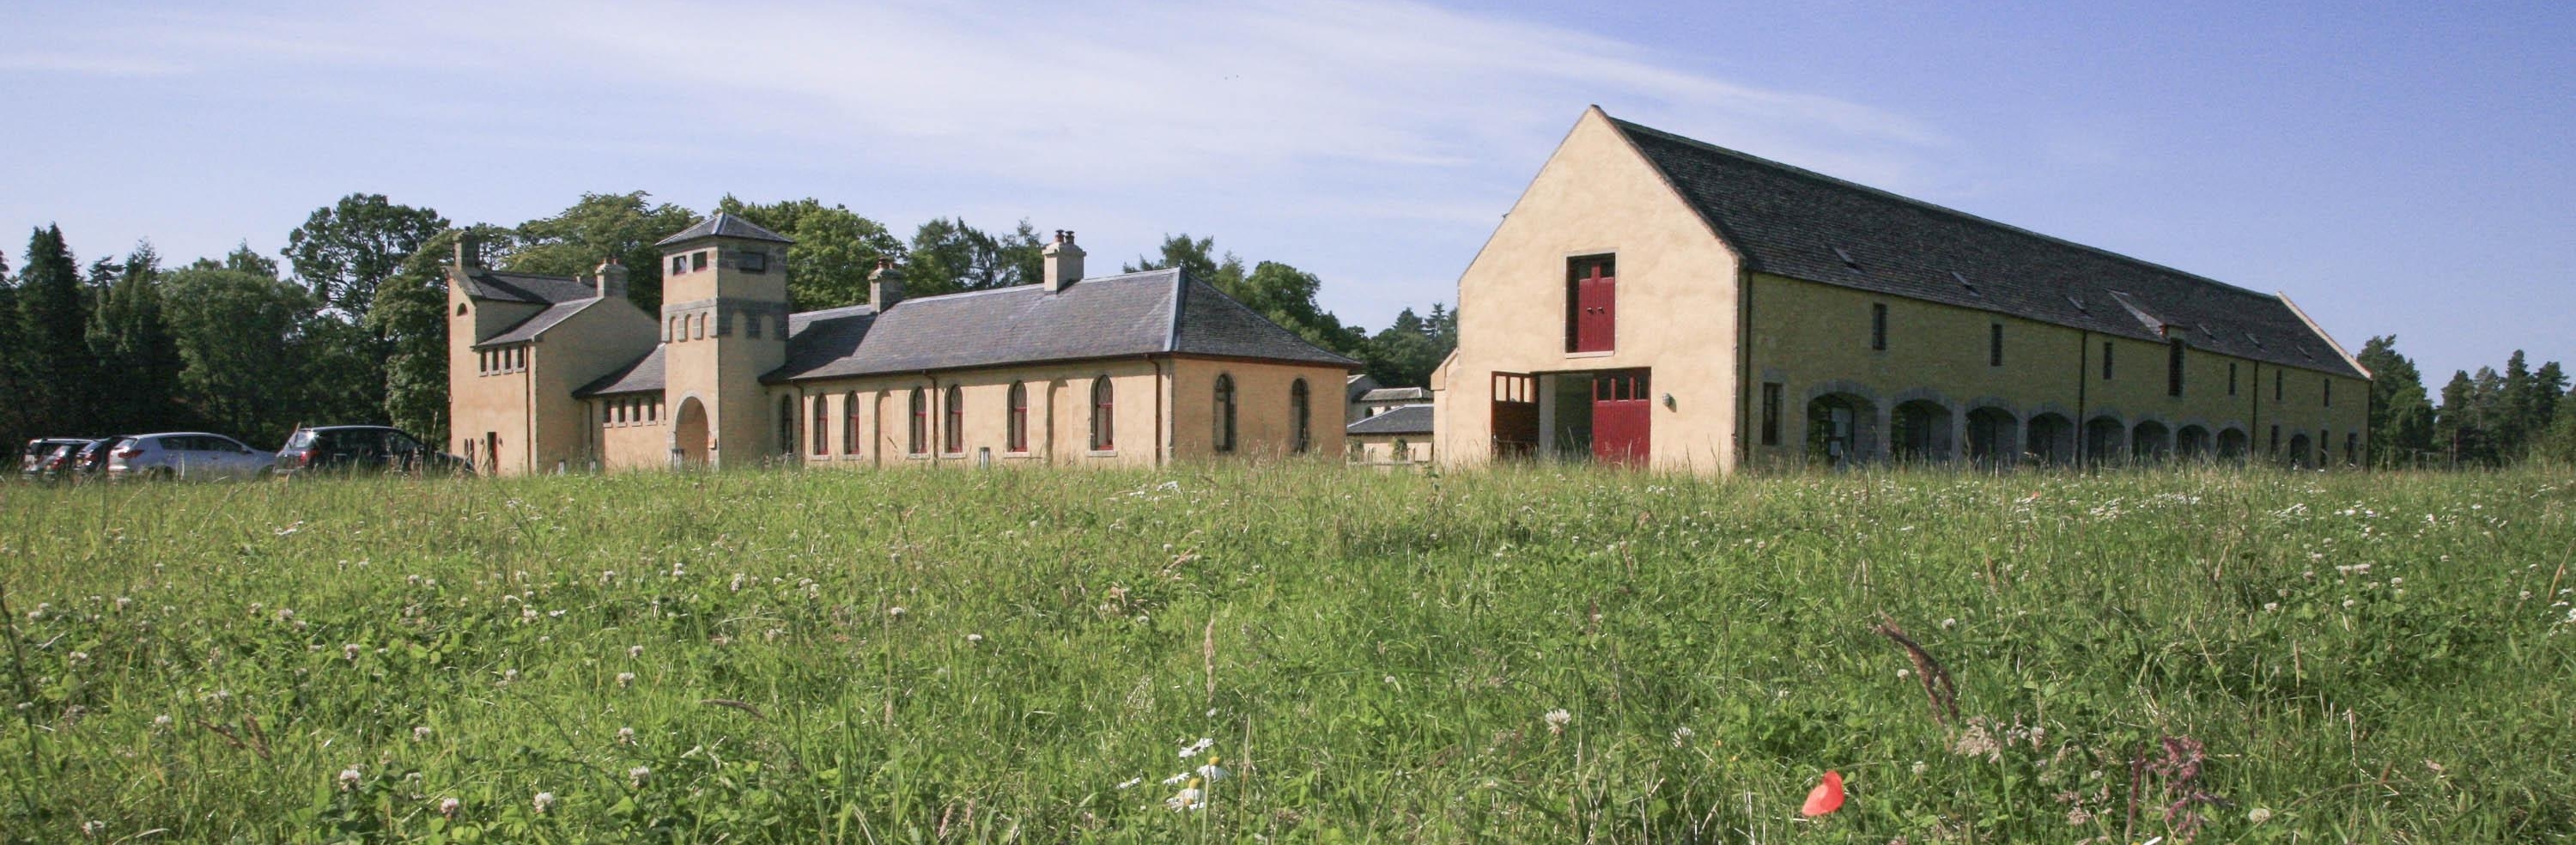 Renovated and converted agricultural buildings on the Altyre Estate, Moray. Used by Glasgow School of Art as a campus. View from across the field. Ochre rendered and washed stone buildings